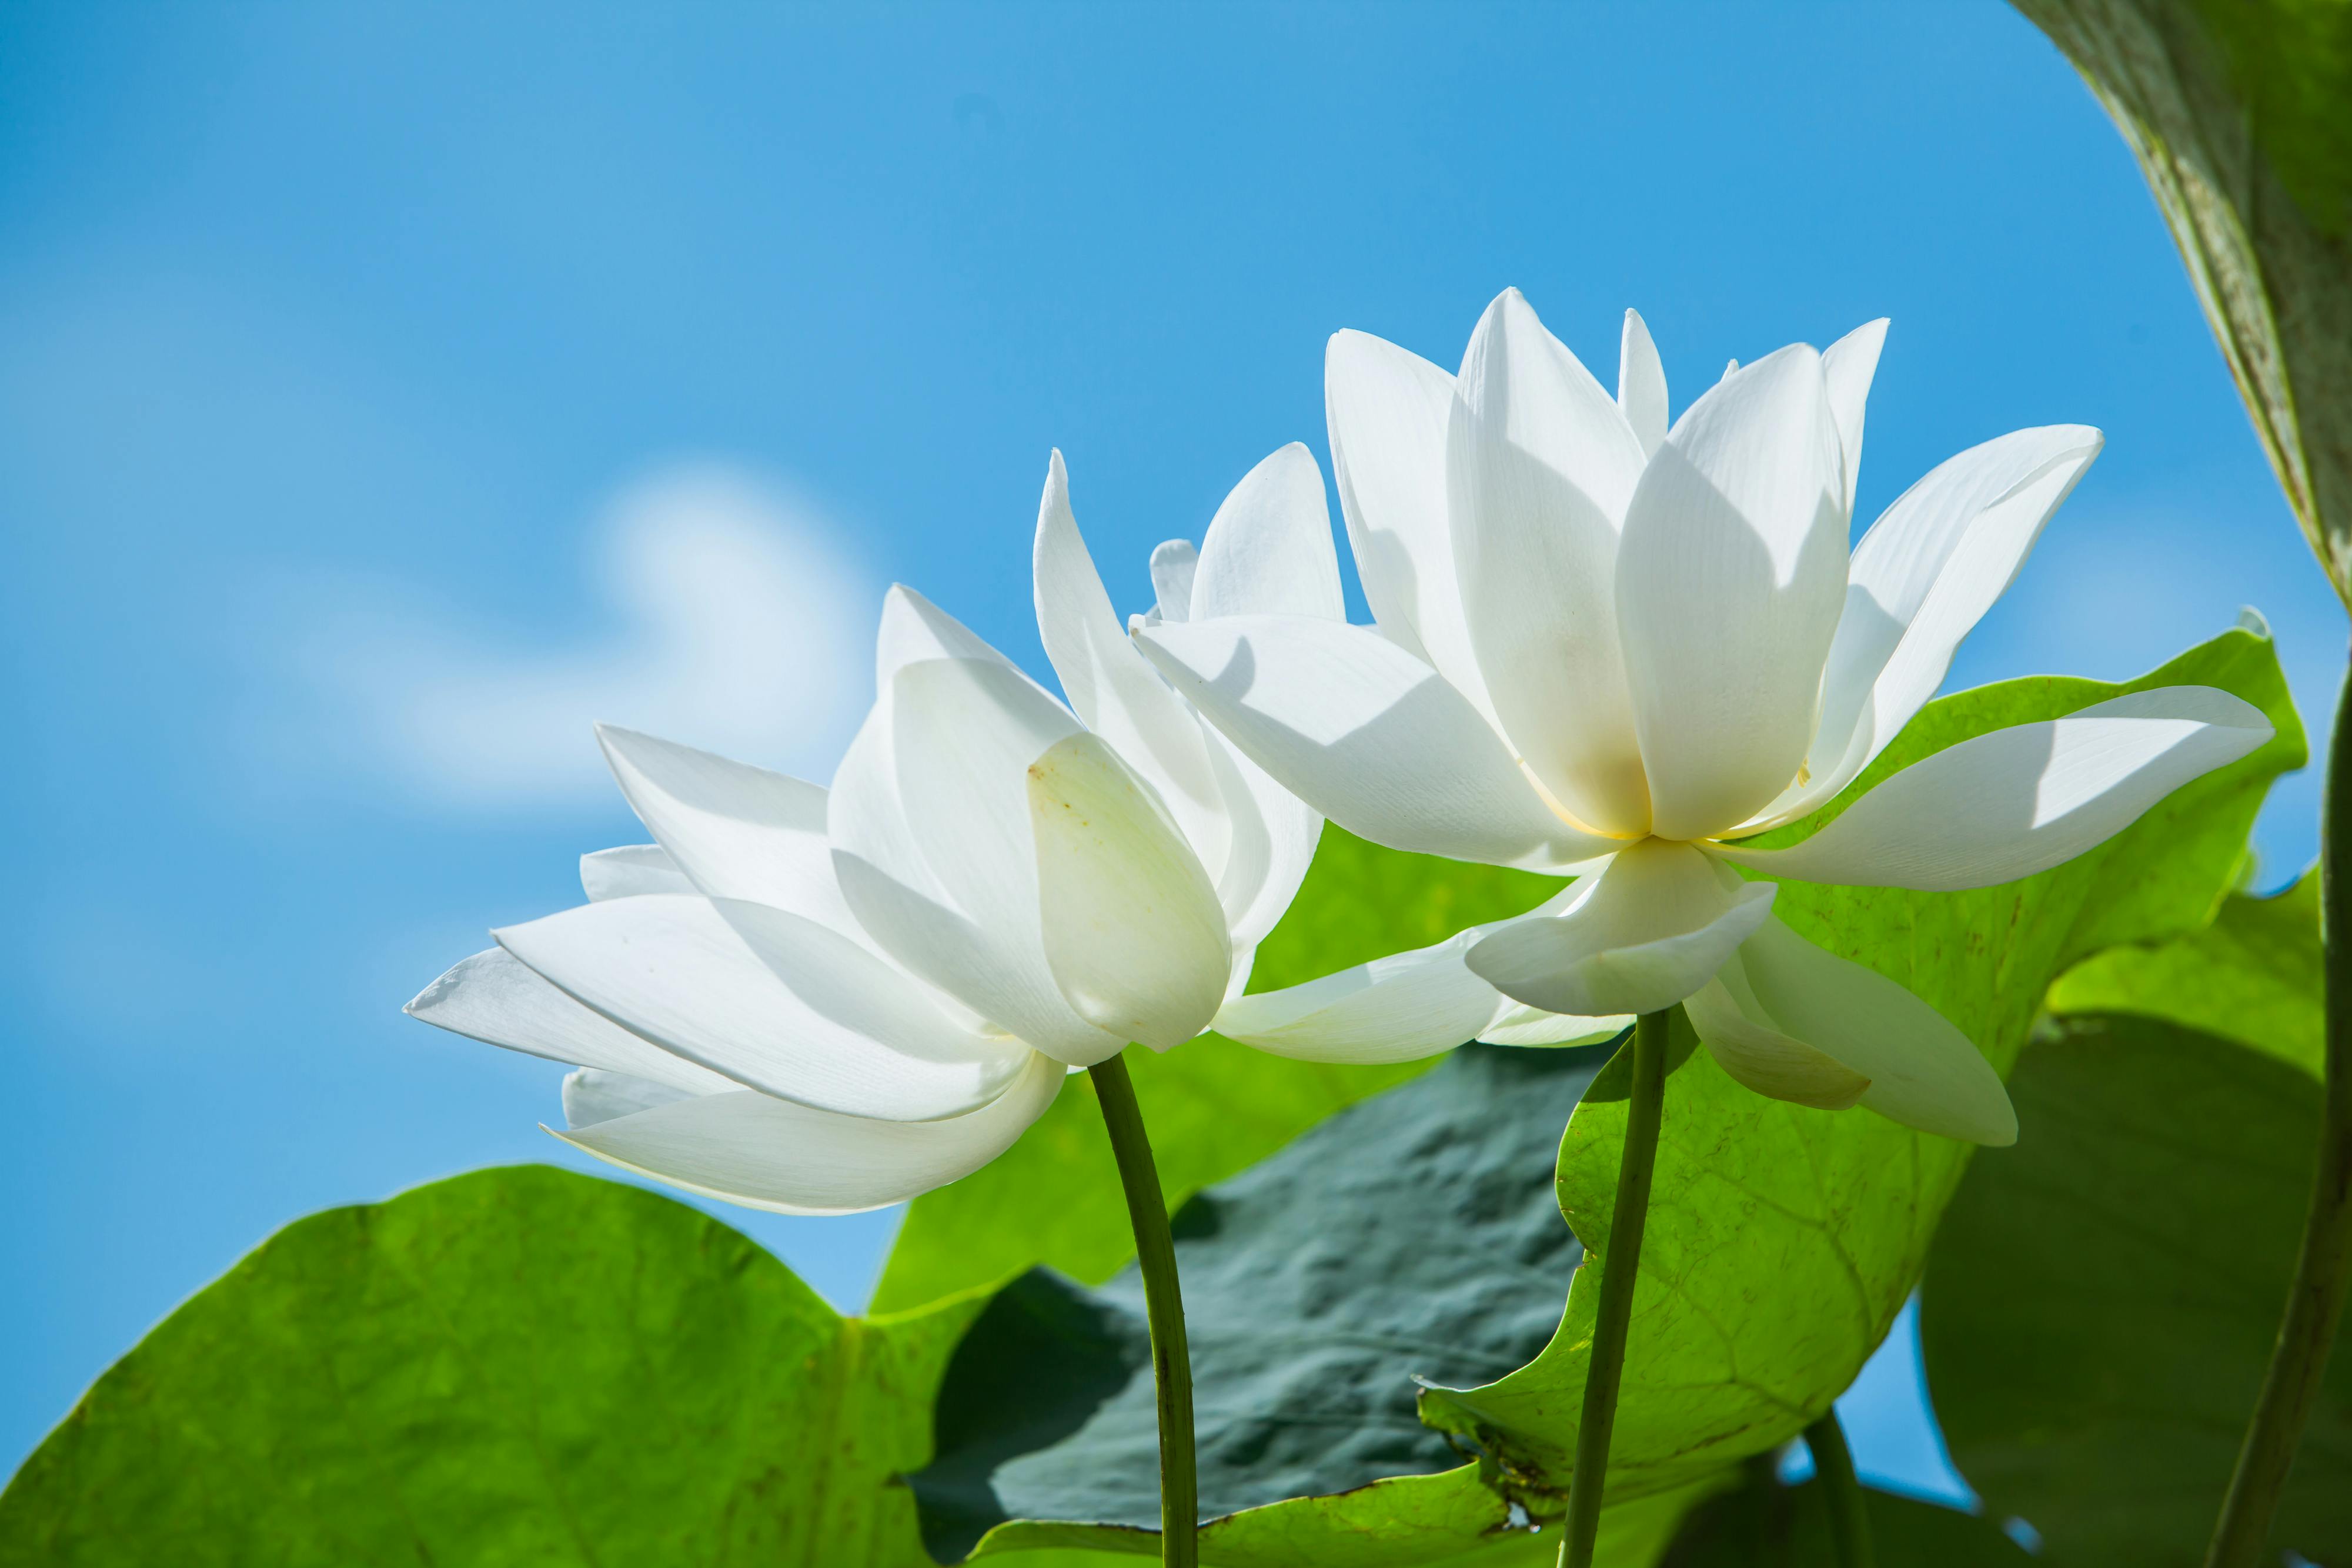 Creating those wild White Lotus wallpapers and the hidden meanings within   Saloncom